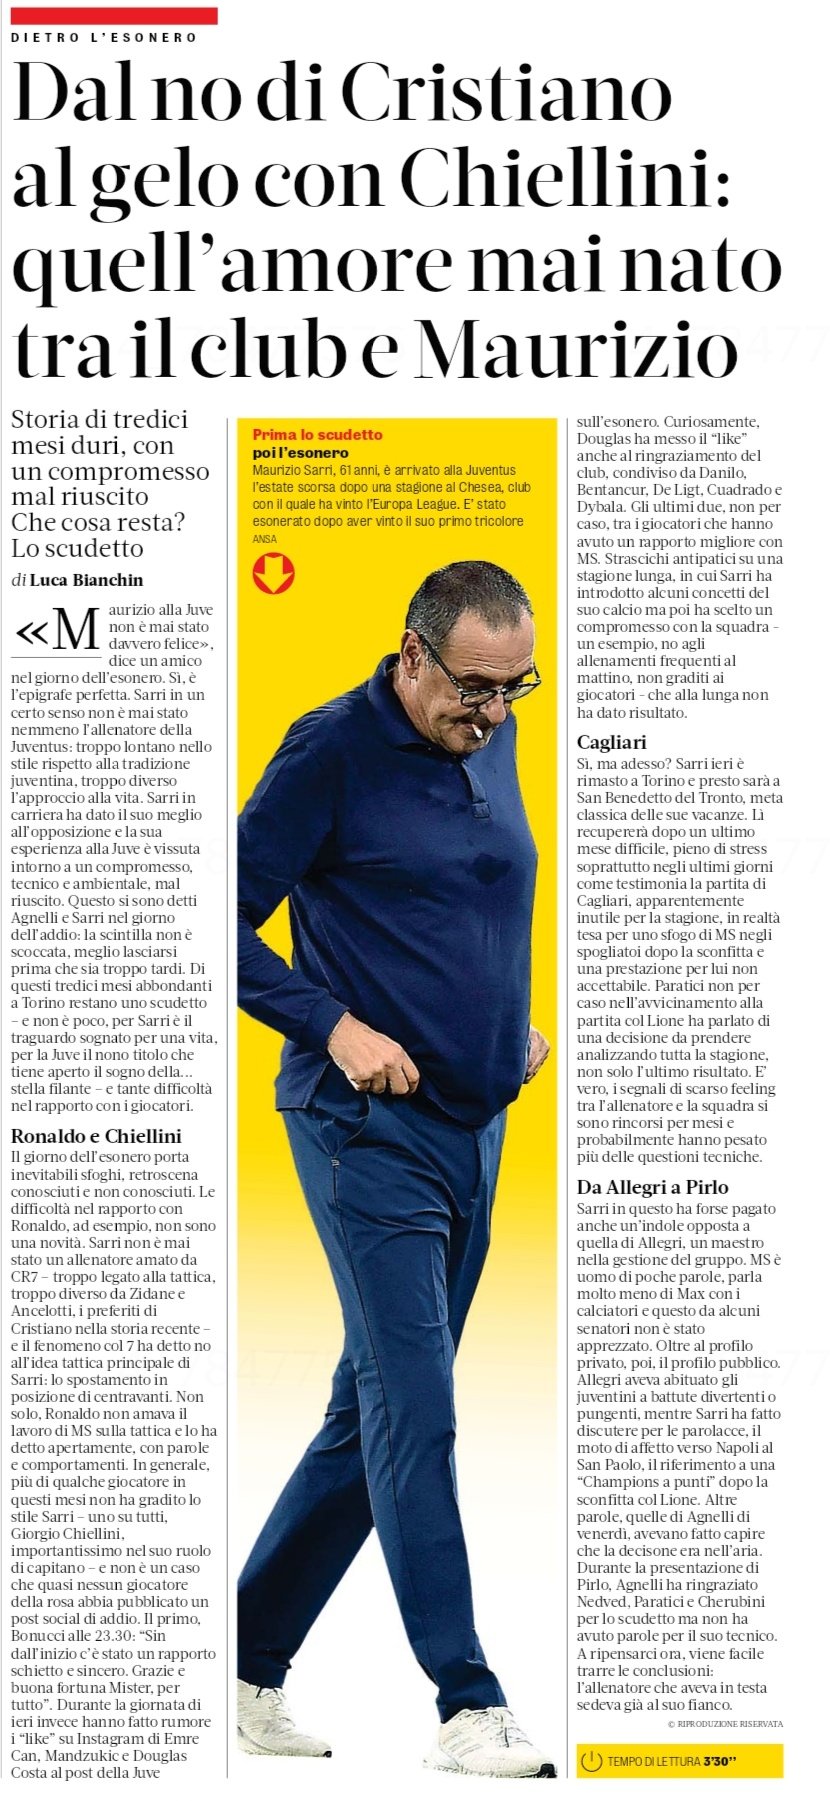 JuveFC on X: There were difficulties in Ronaldo and Sarri's relationship.  Cristiano wasnt a fan of Sarri's tactics and said it openly. In general,  more than a few players didn't like Sarri's